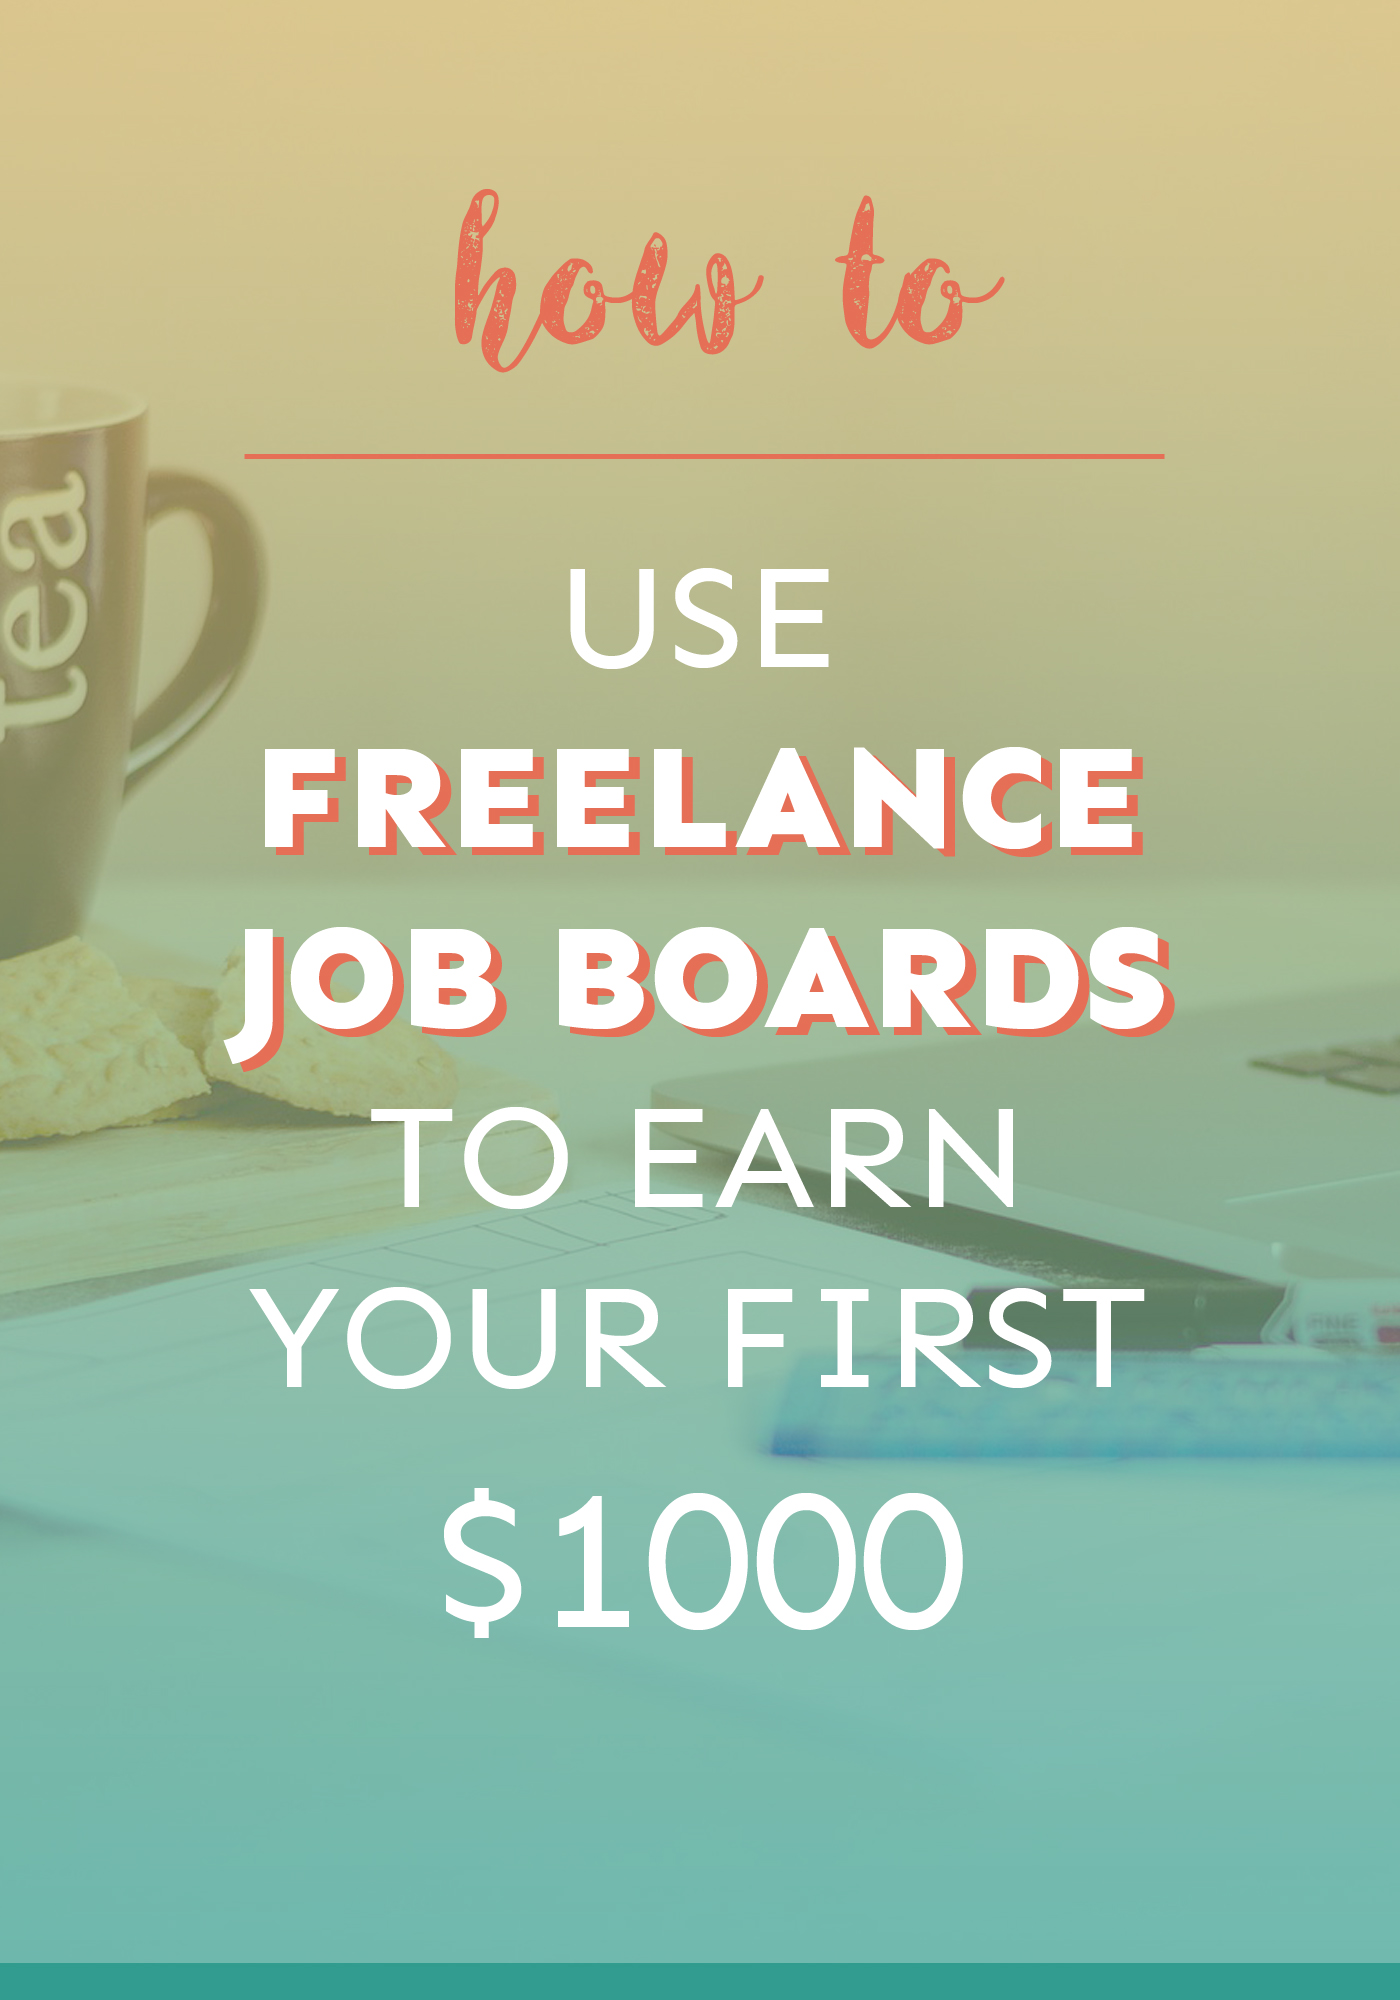 Learn how to use freelance job boards to earn your first $1,000, with 5 examples of the top job boards!